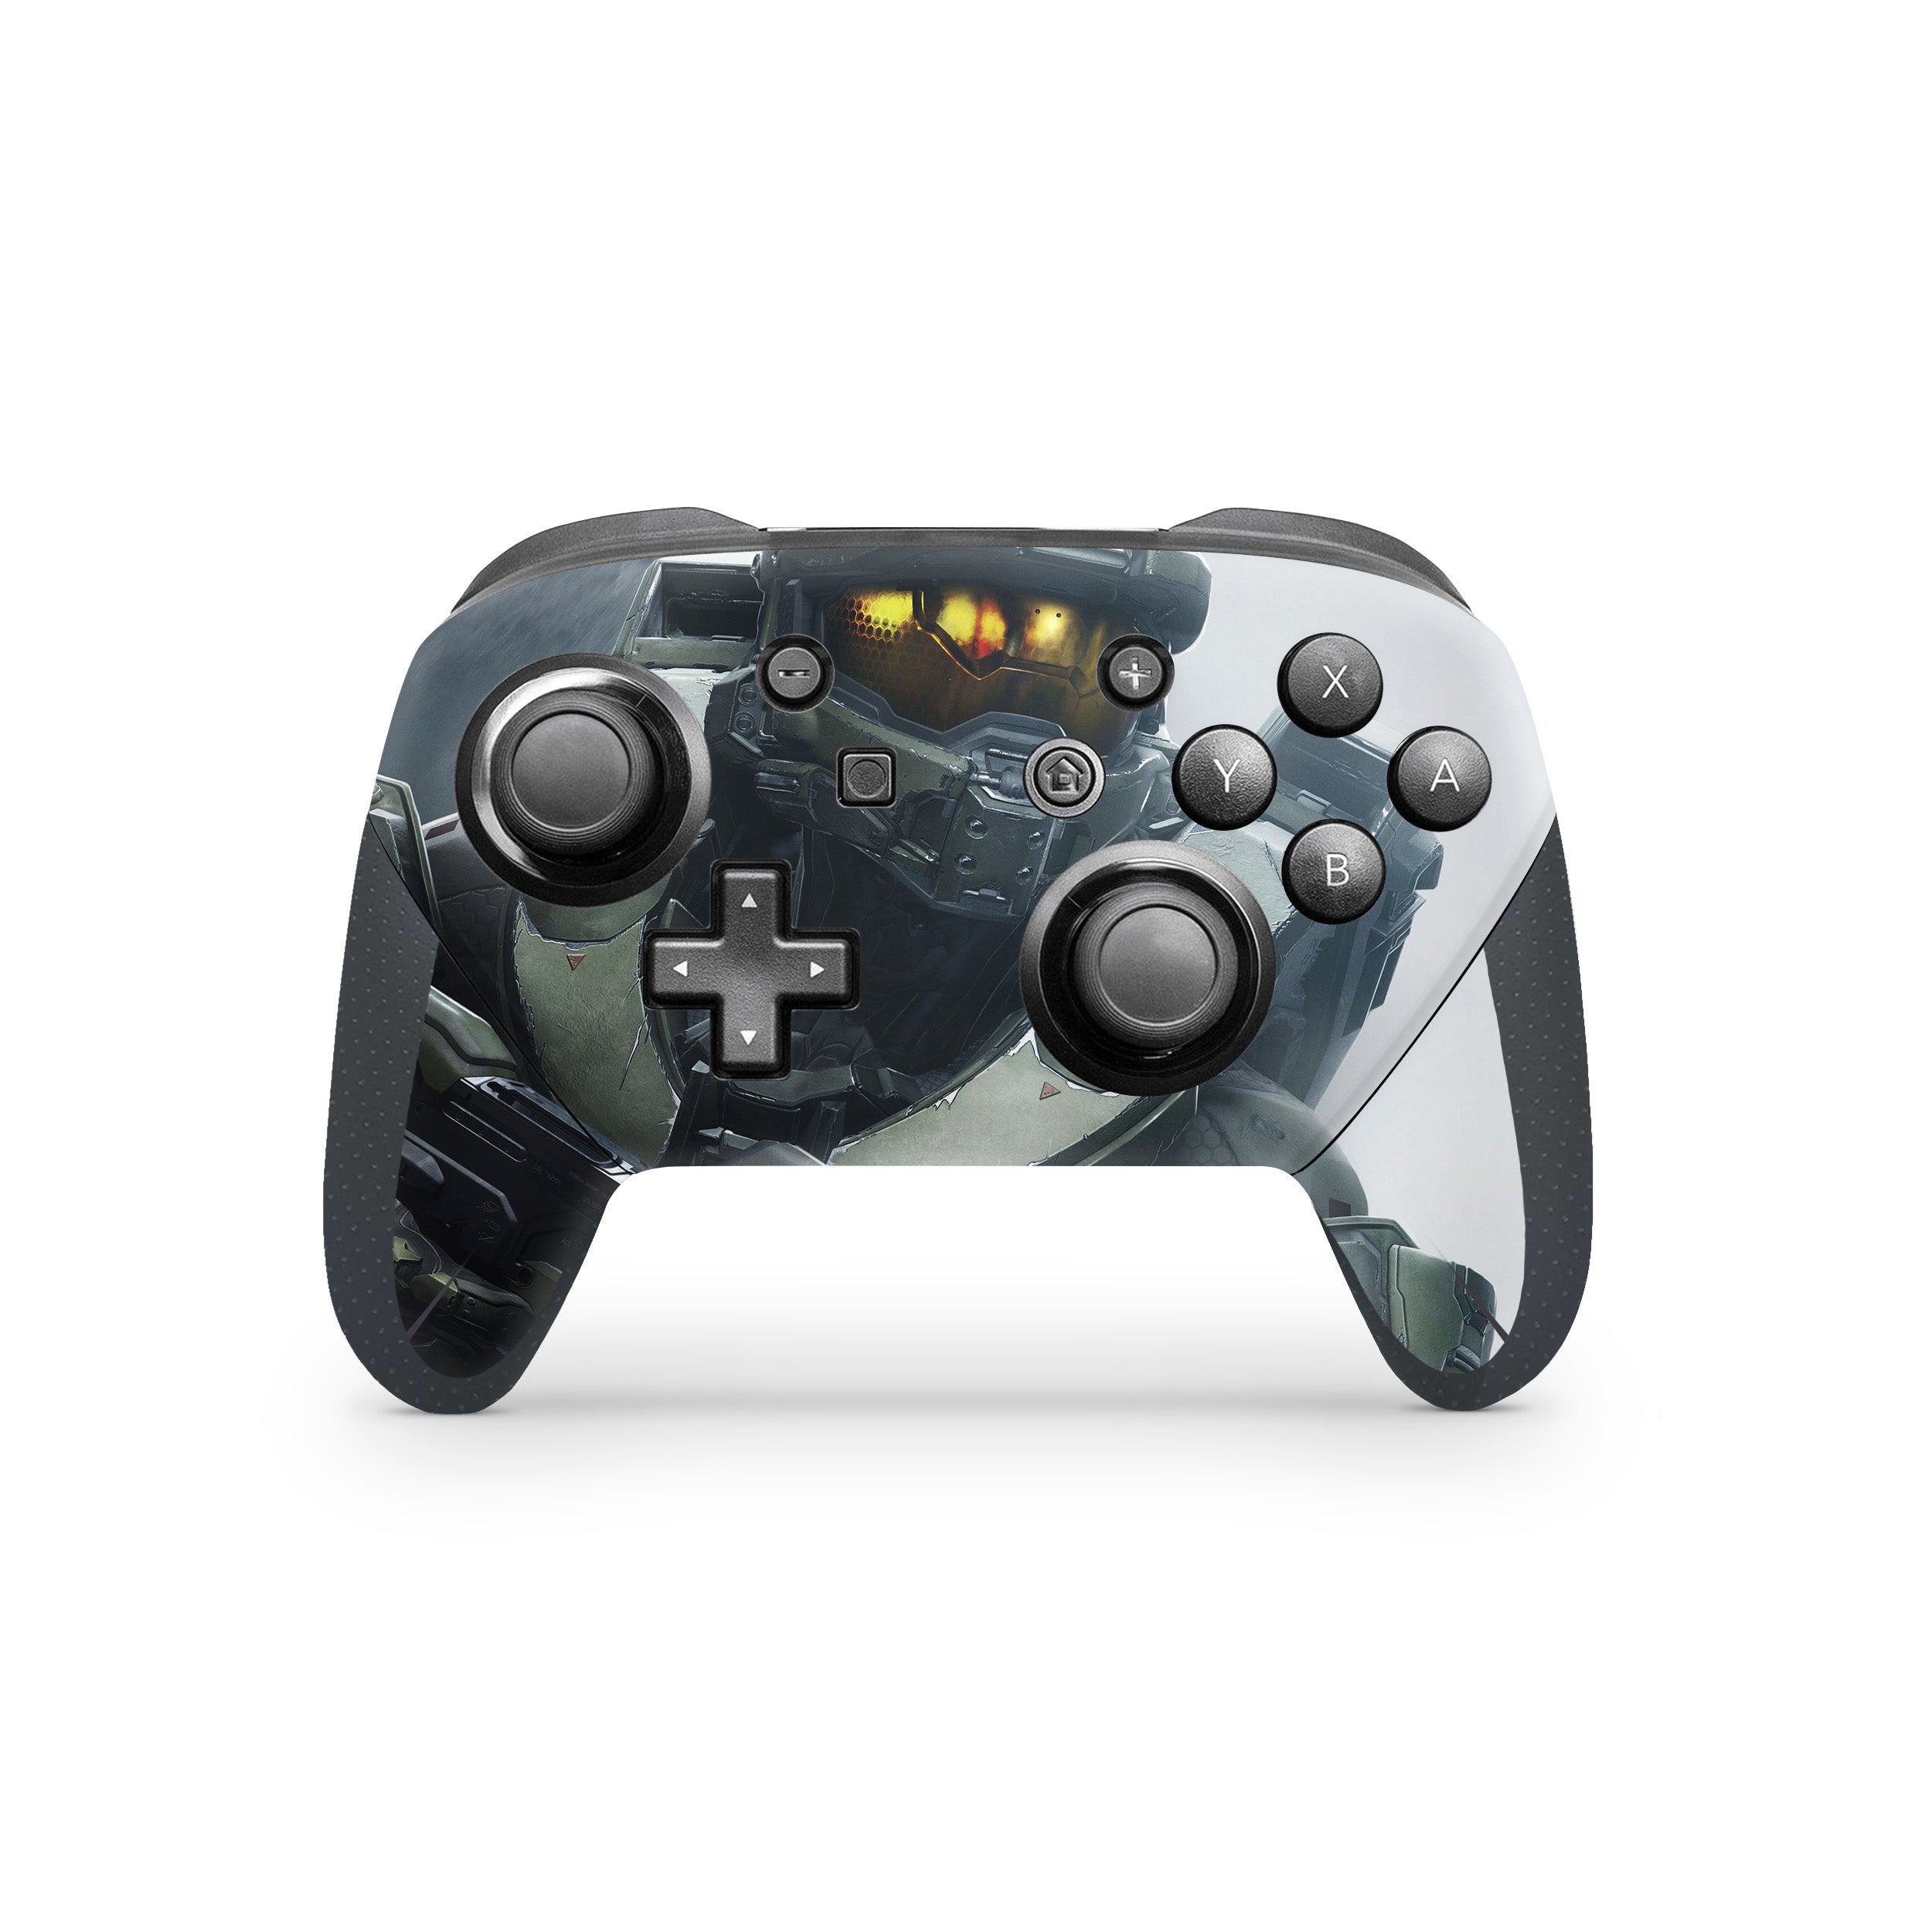 A video game skin featuring a Halo design for the Switch Pro Controller.